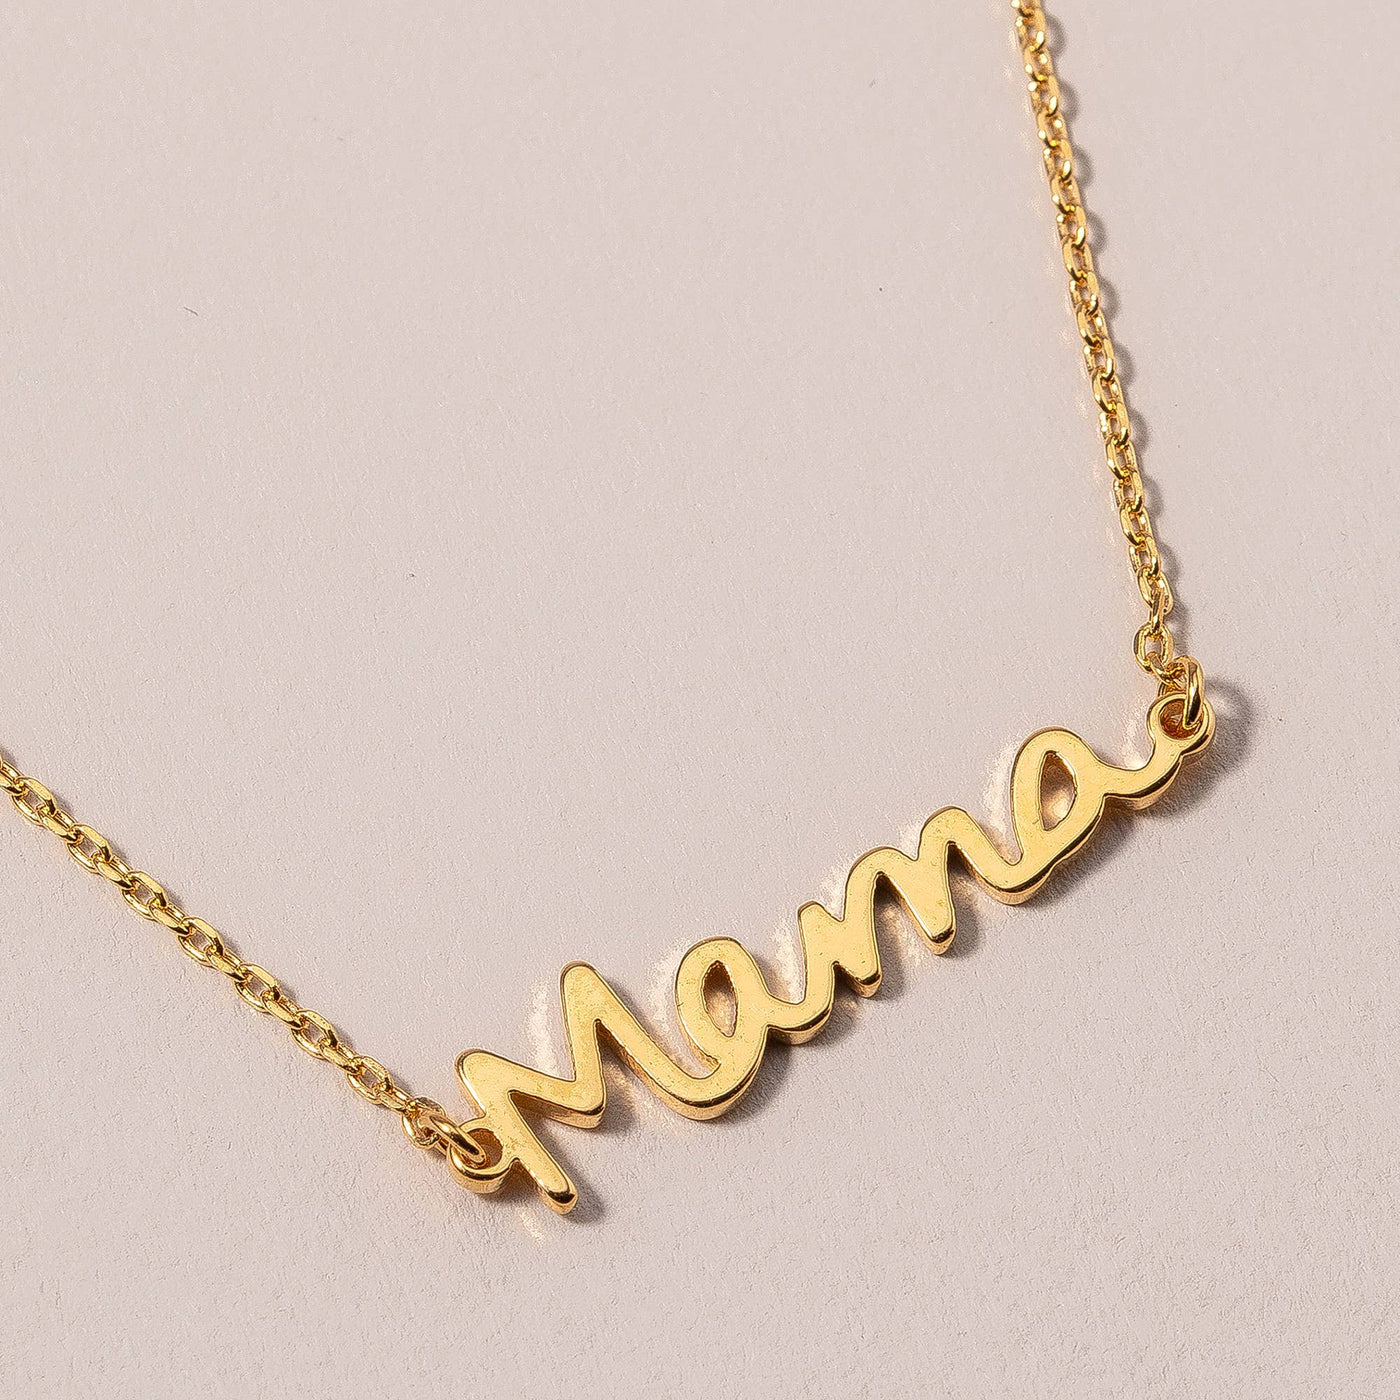 MAMA Script Charm Anklet